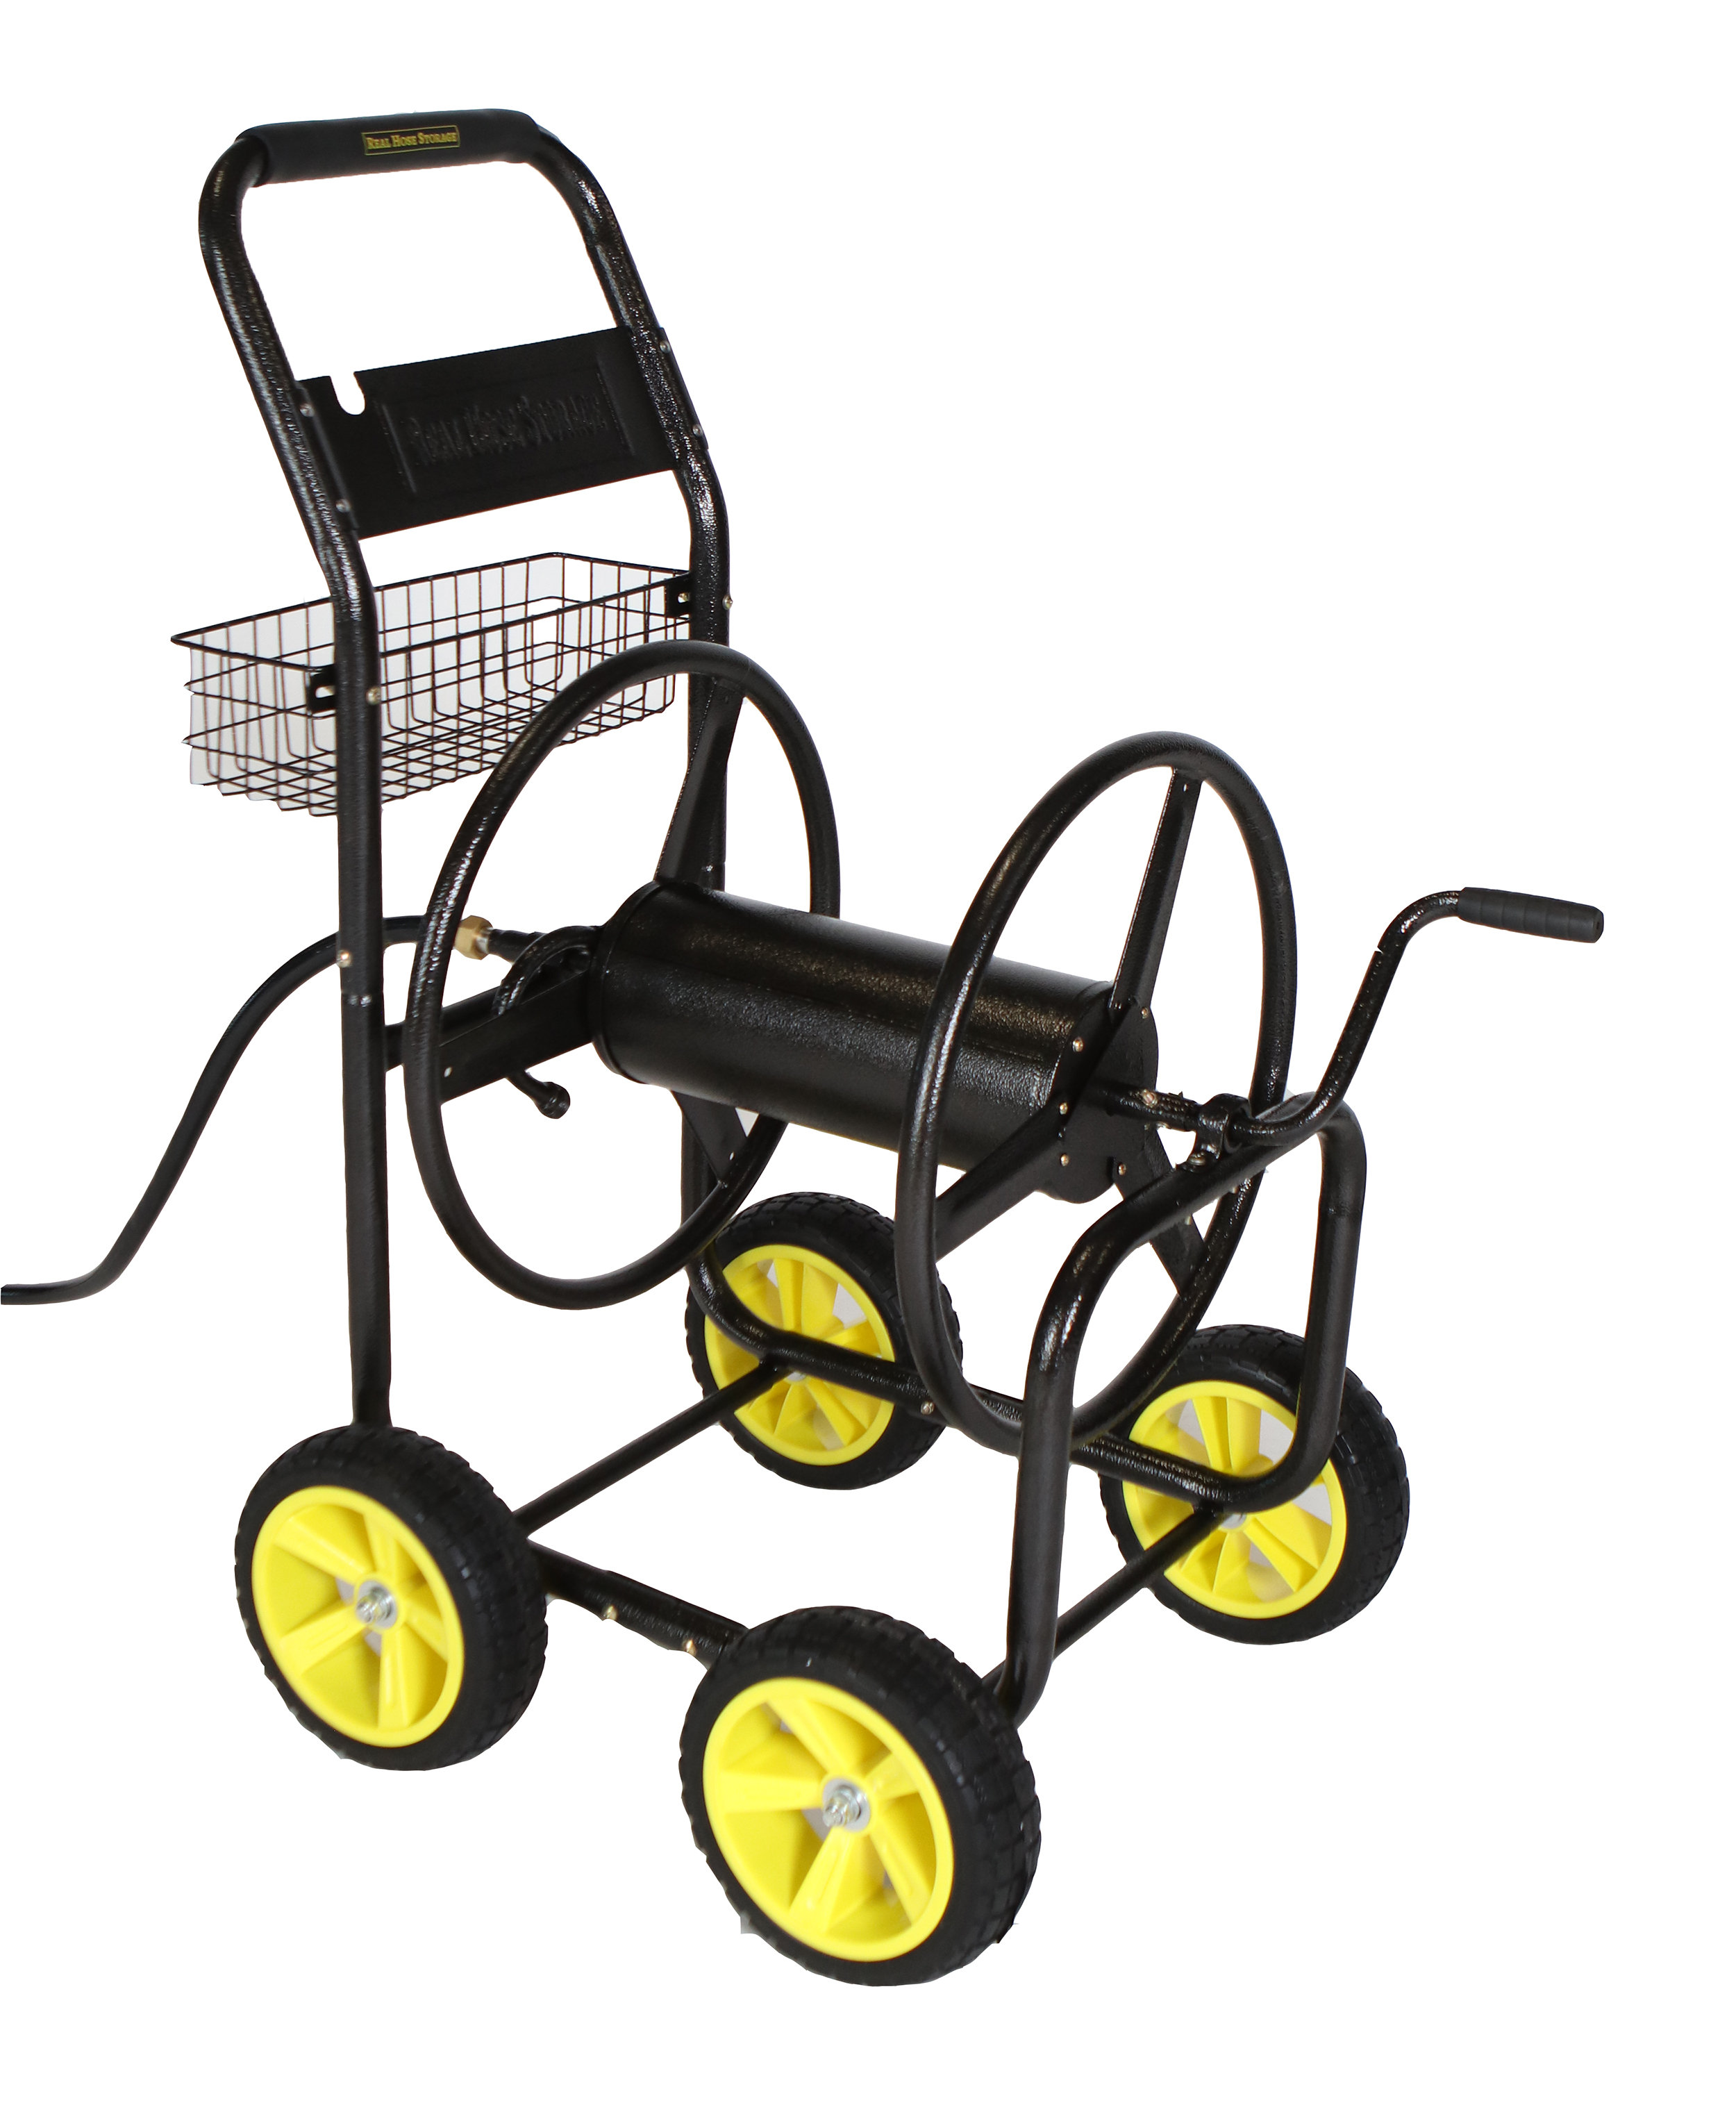 Hose Reel Cart Water Hose Cart with Wheels Heavy Duty Outdoor Hose Cart,  Garden Hose Reel with Rollers, Hand-Push Water Pipe Storage Holder, Lawn